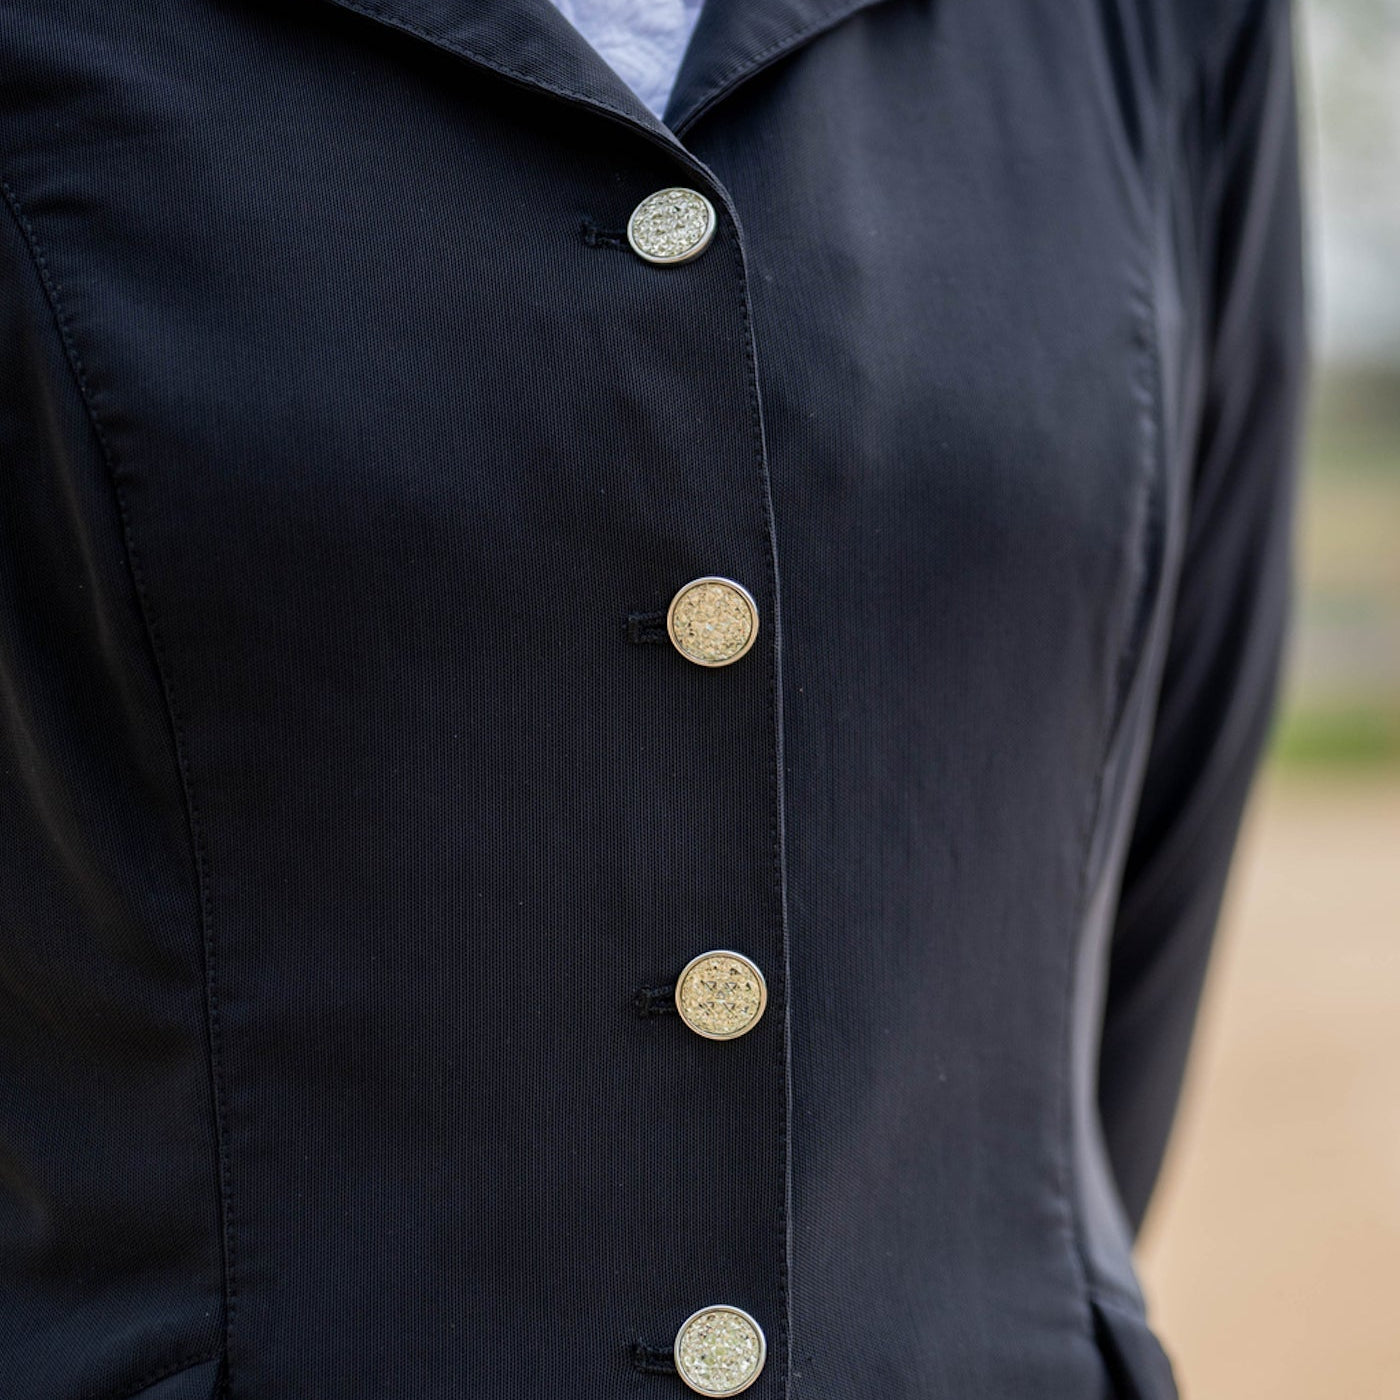 FITS Zephyr Dressage Show Coat, Rhinestone Buttons - Equiluxe Tack